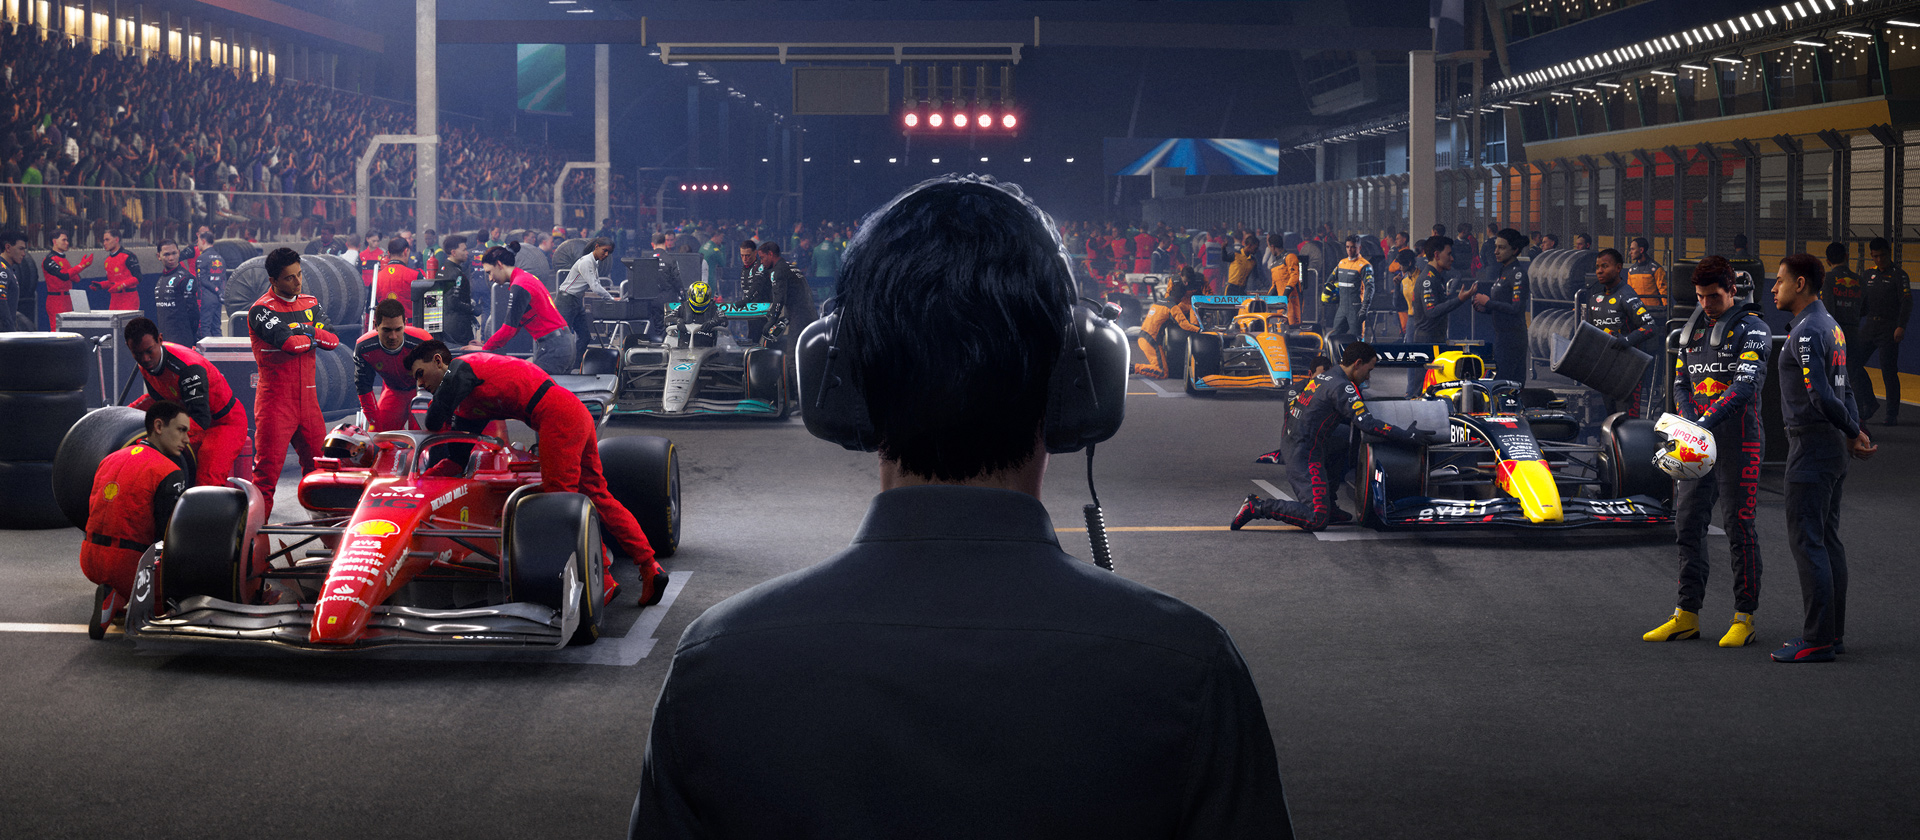 Image of formula one cars and back of head with headphones